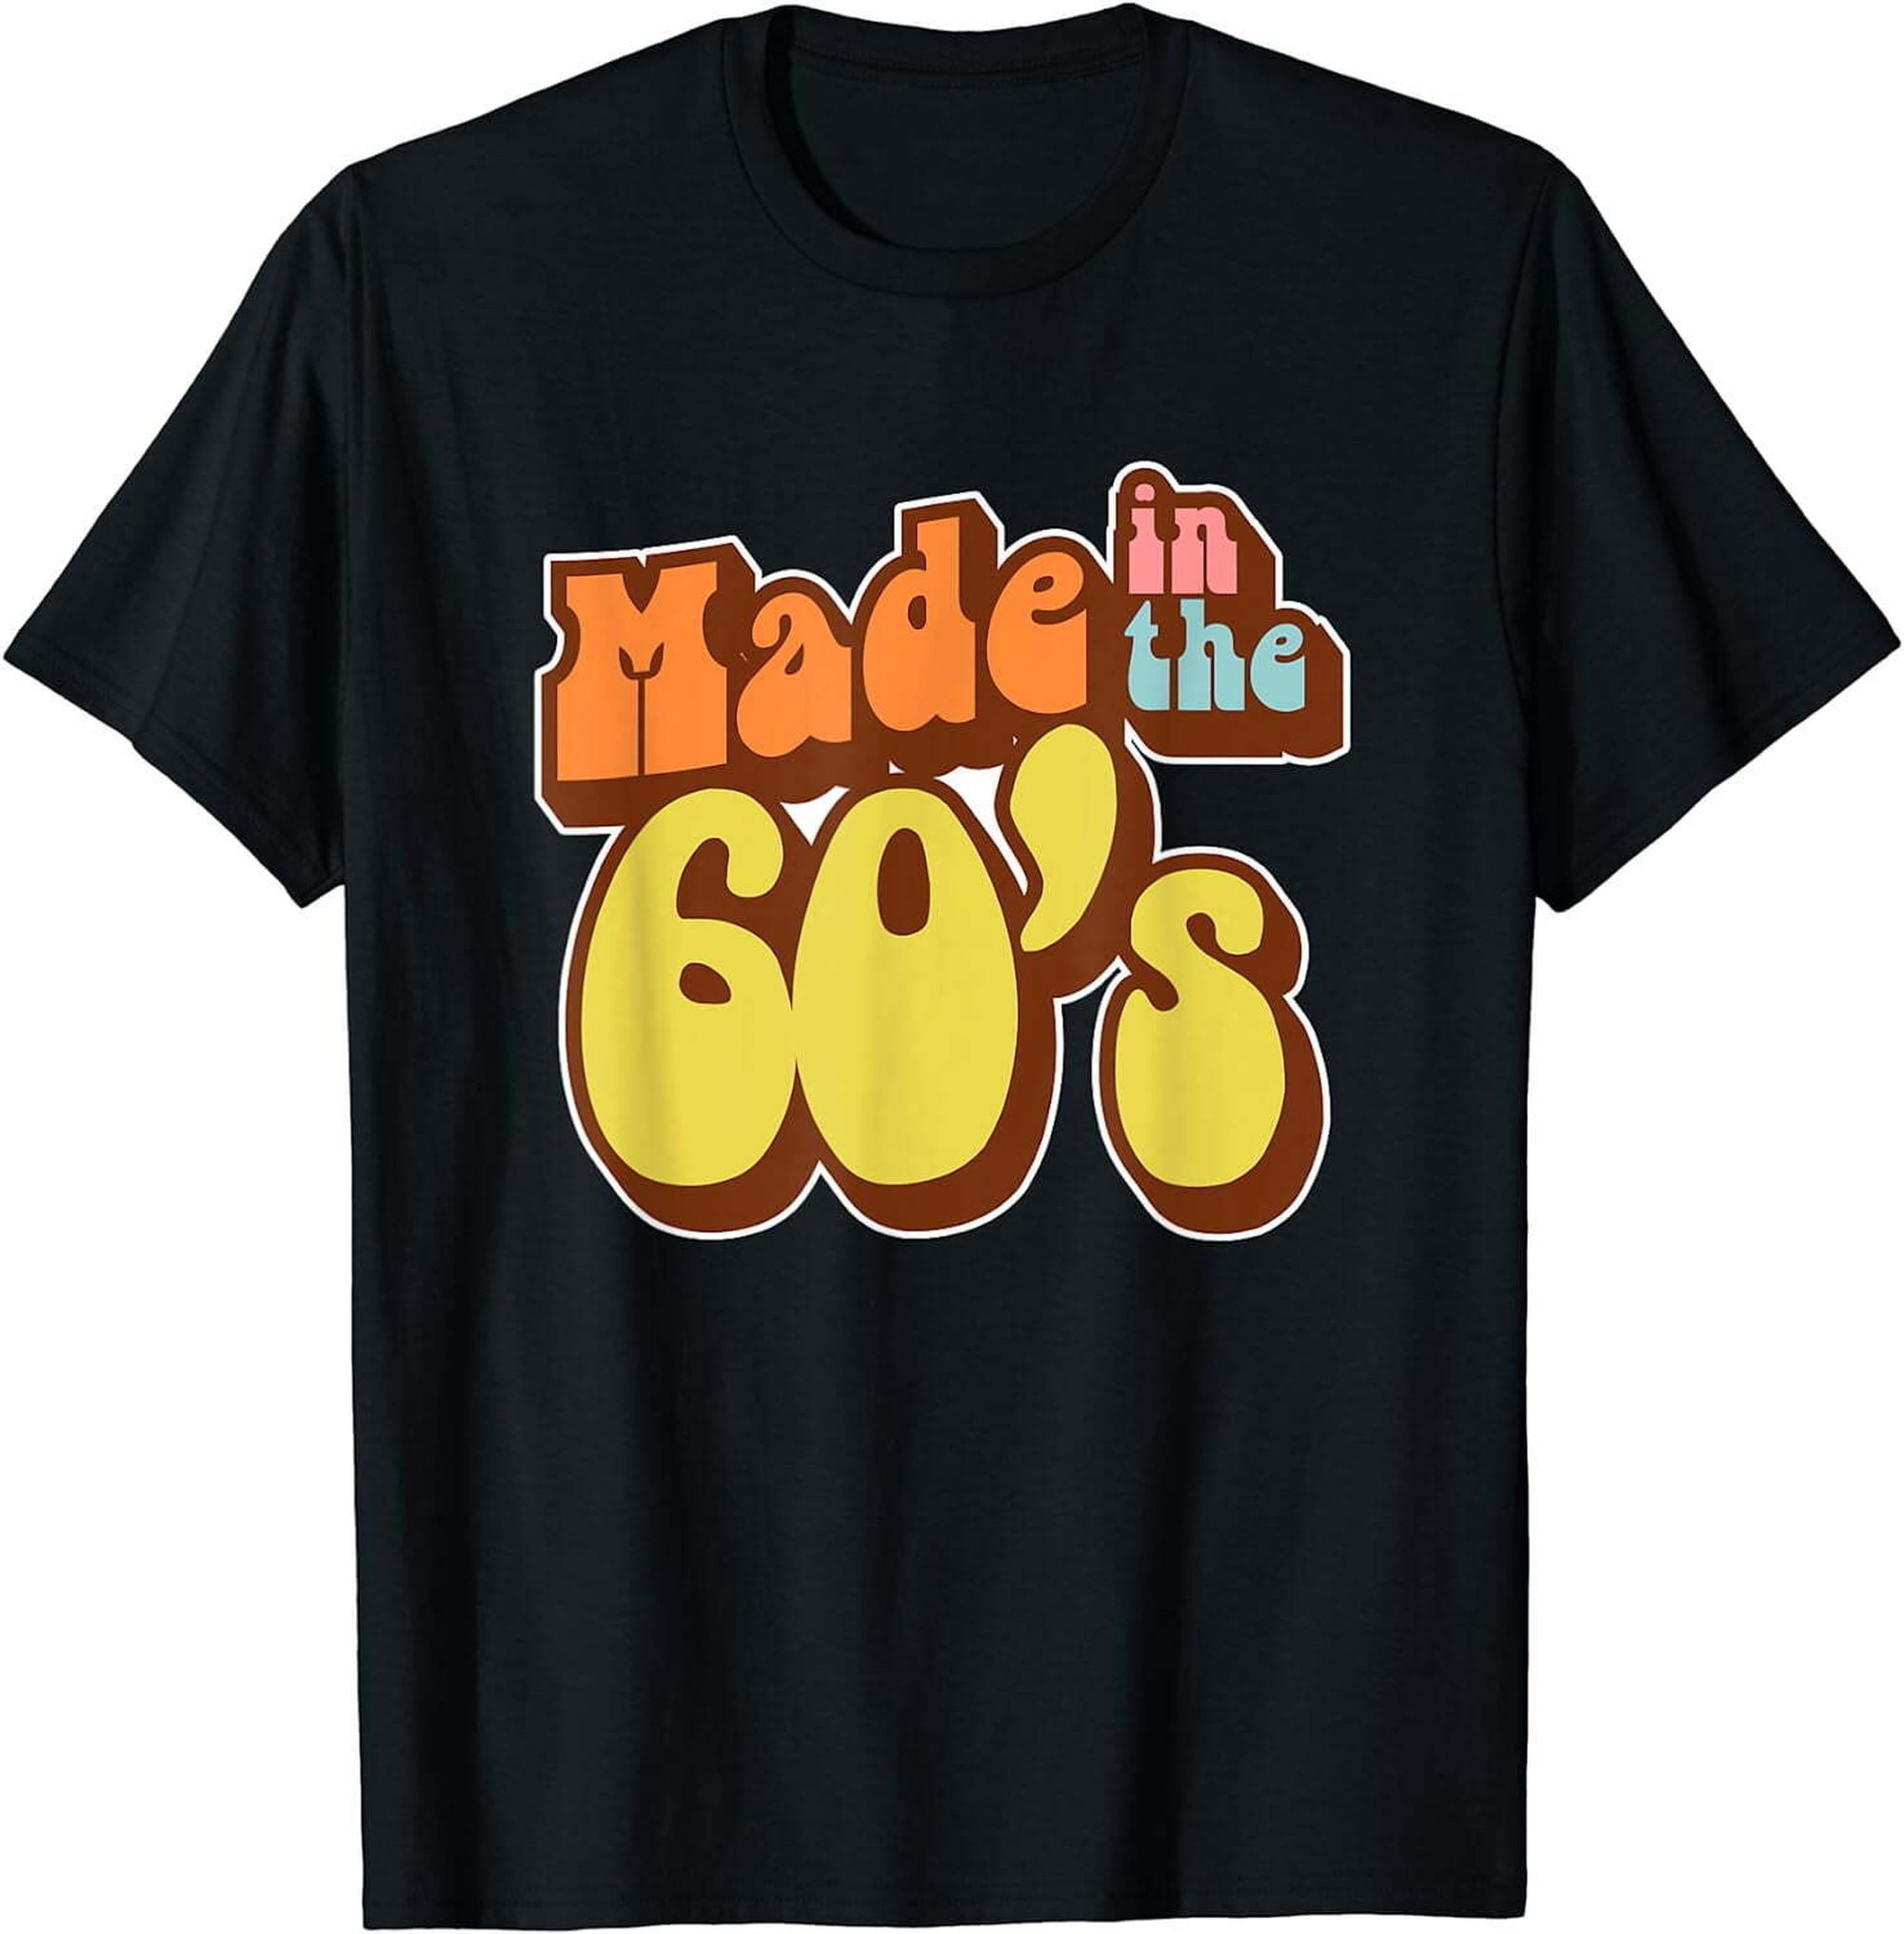 Time Travel with our Classic 60s Black T-Shirt - An Essential Vintage ...